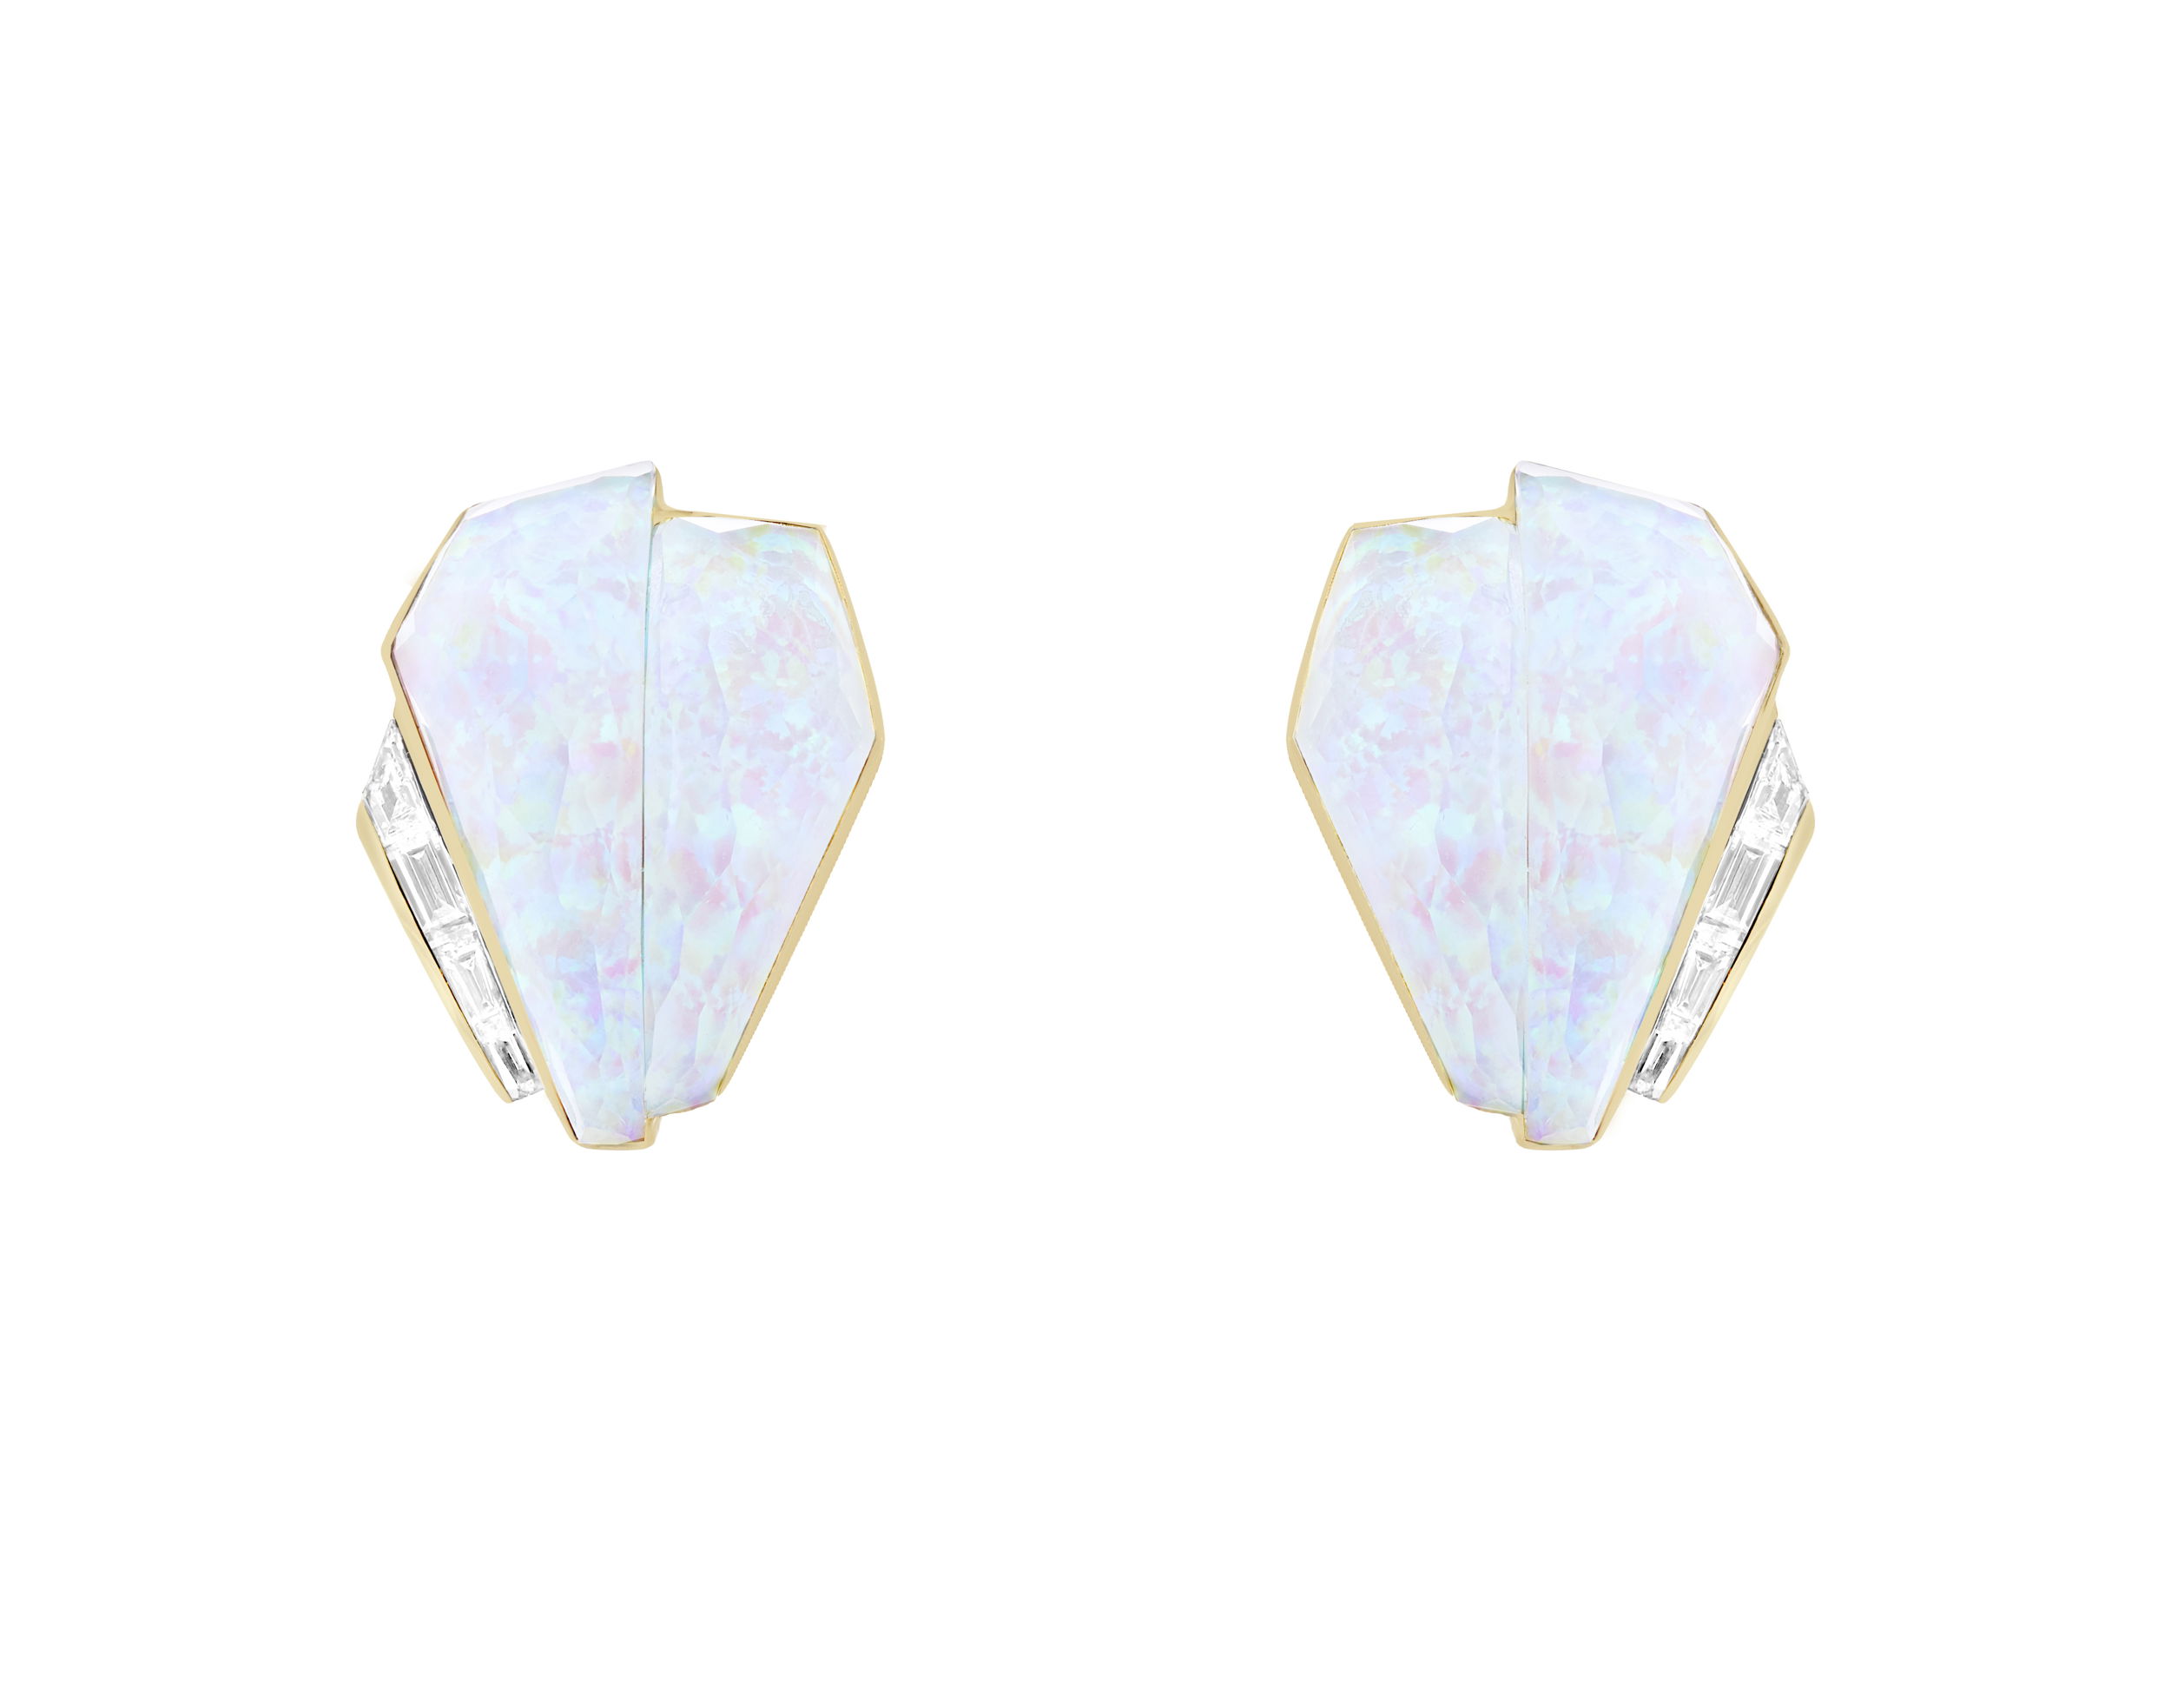 CH2 Shard Cuff Earrings with White Opalescent in 18kt Yellow Gold